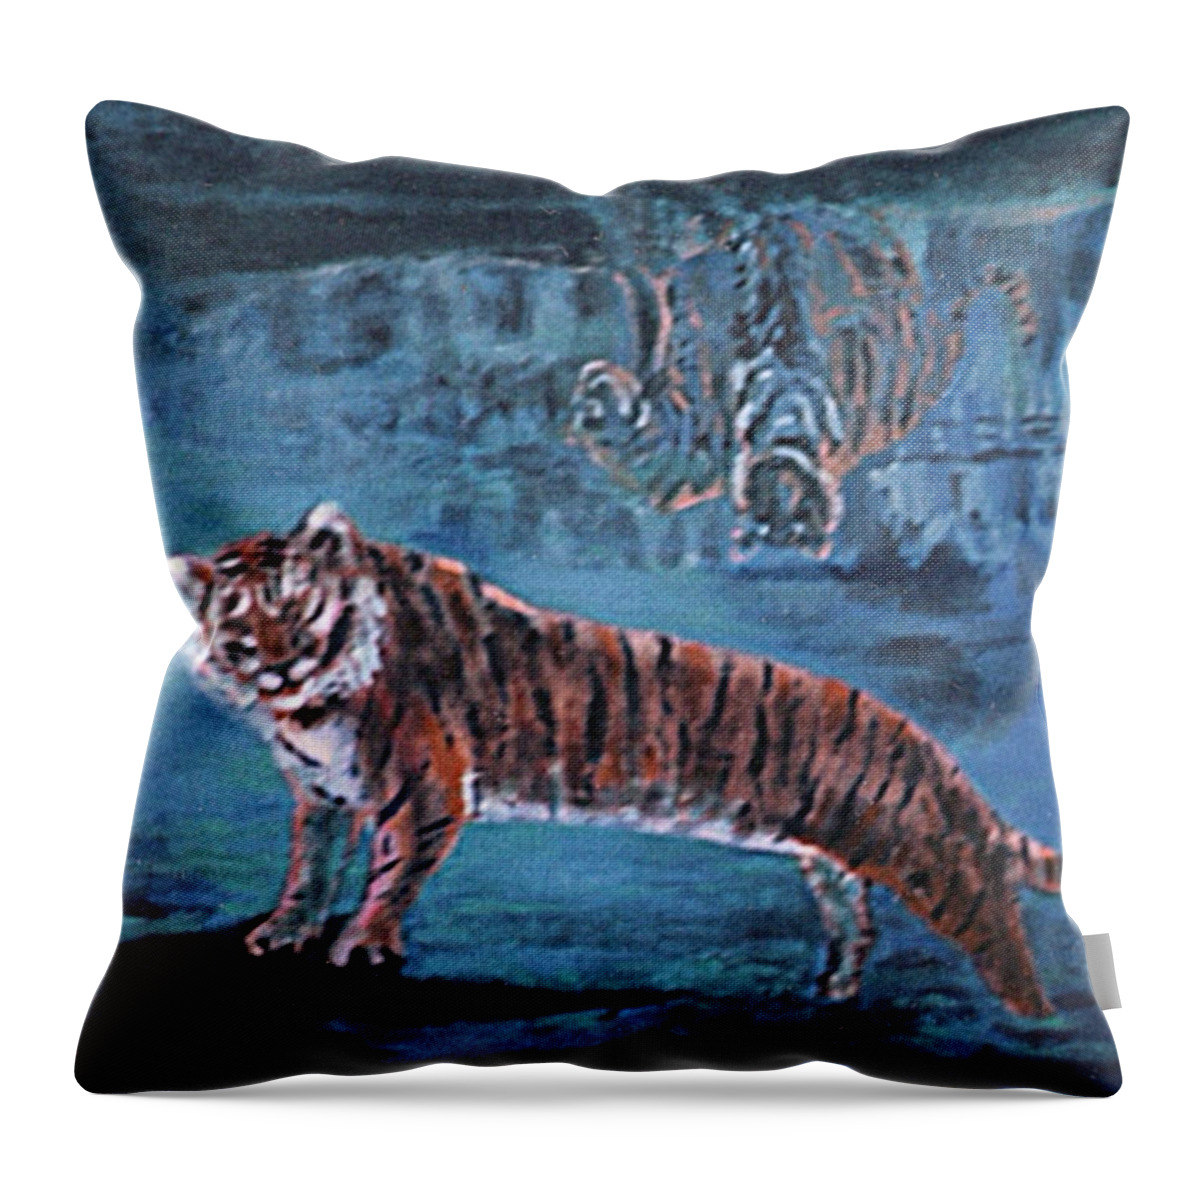 Tiger Throw Pillow featuring the painting Salvato dalle acque by Enrico Garff